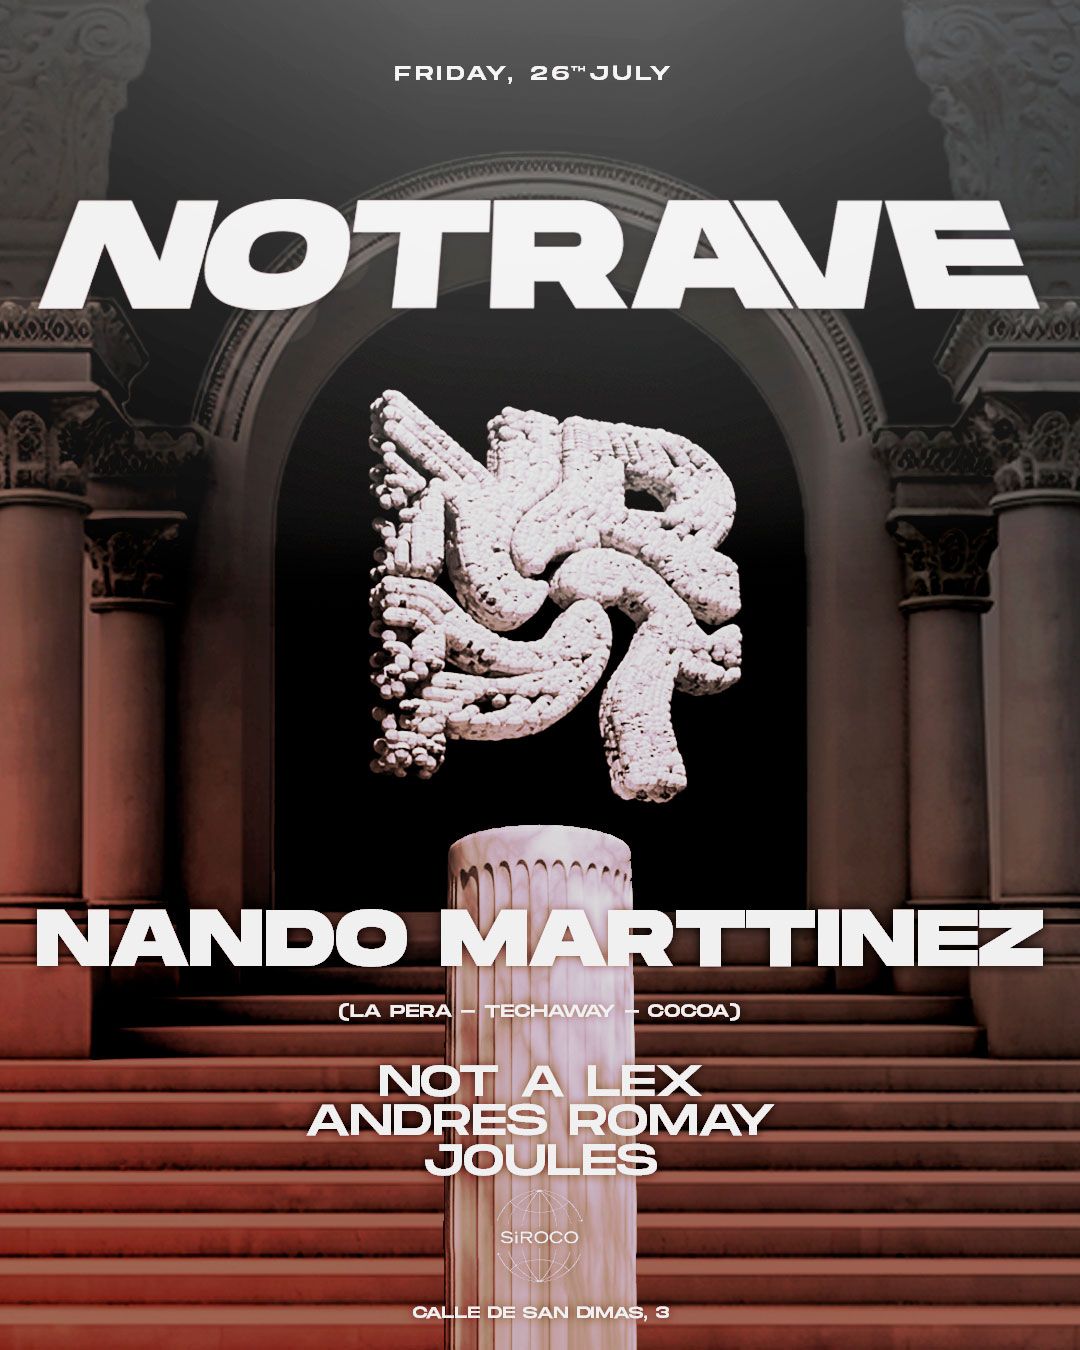 NotRave: Nando Marttinez + Not A Lex + Andres Romay + Joules